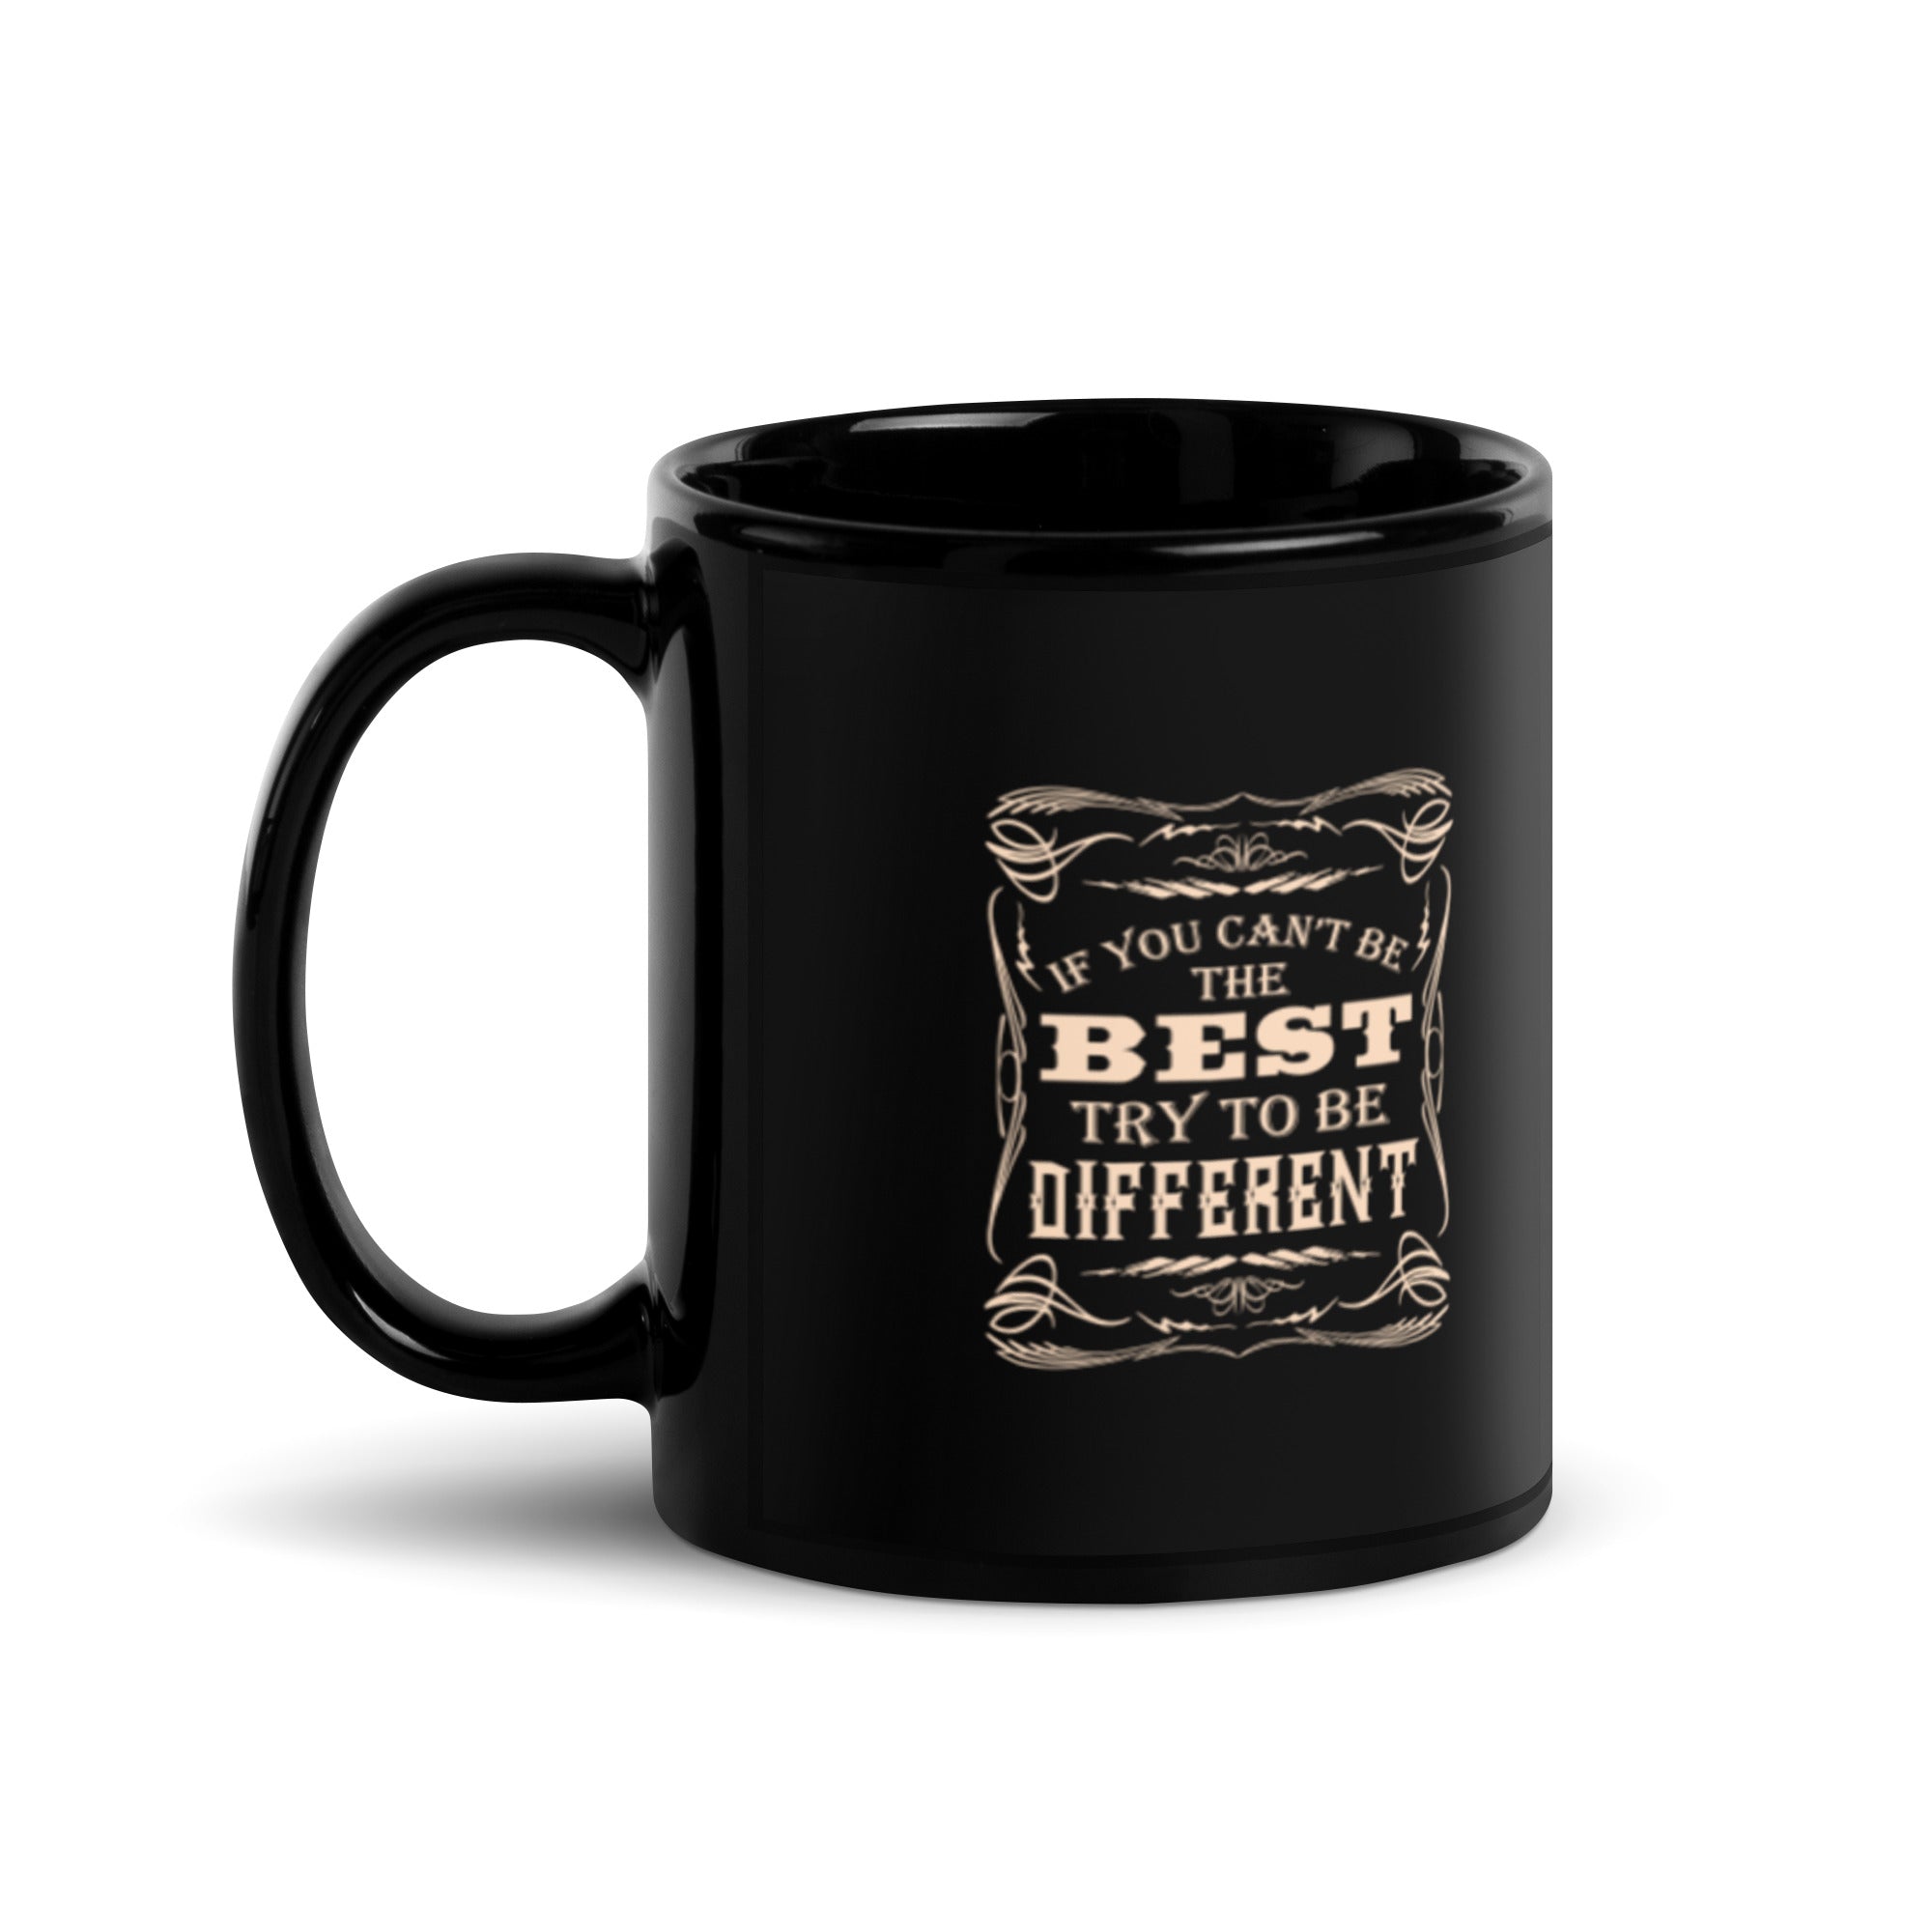 If You Can't Be The Best Try To Be Different - Black Glossy Mug